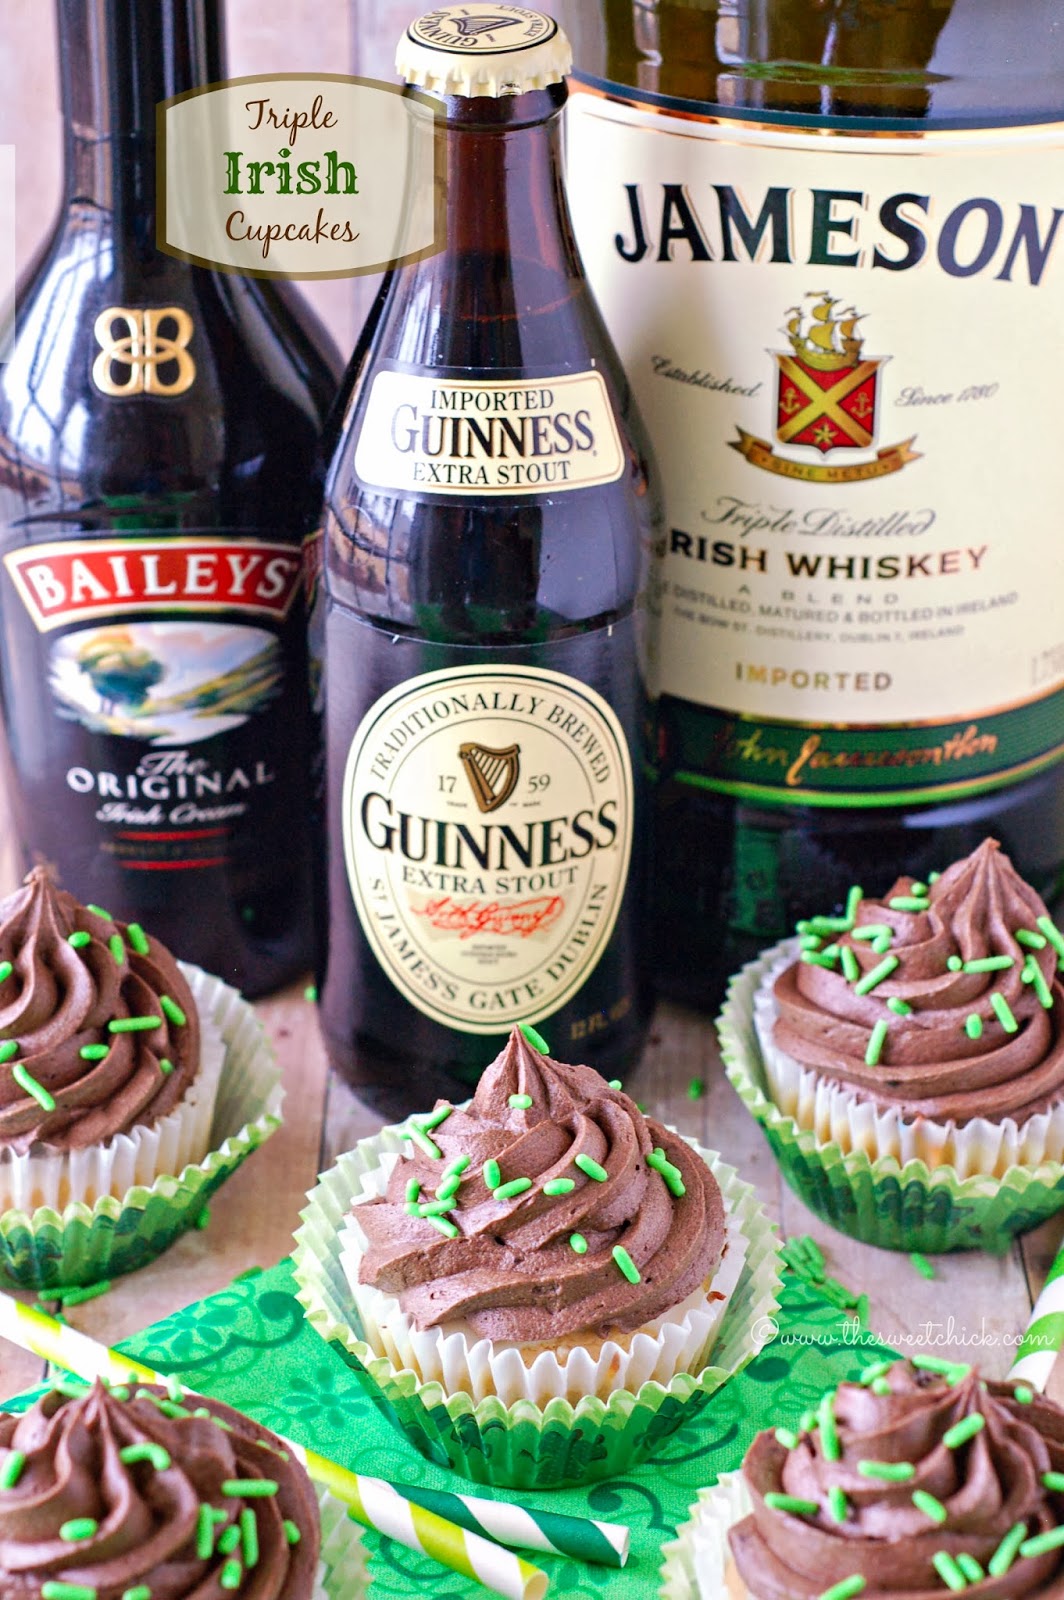 Triple Irish Cupcakes by The Sweet Chick